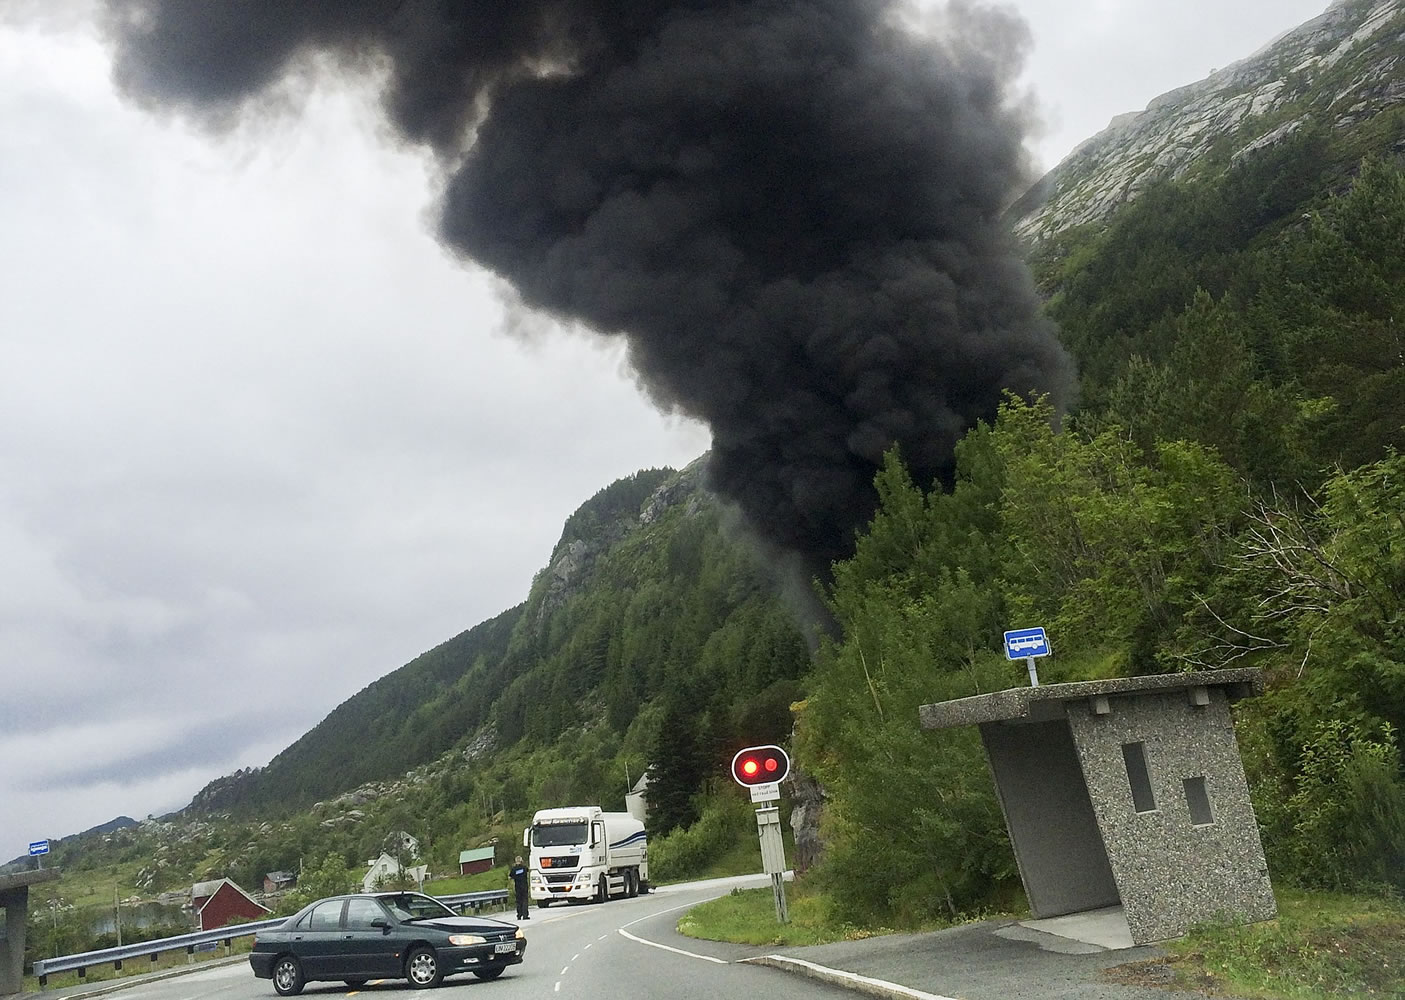 Smoke pours from the Skatestraum tunnel after a fuel truck crashed into the tunnel's side, triggering a series of explosions inside the tunnel in Bremanger, Norway, on Wednesday .